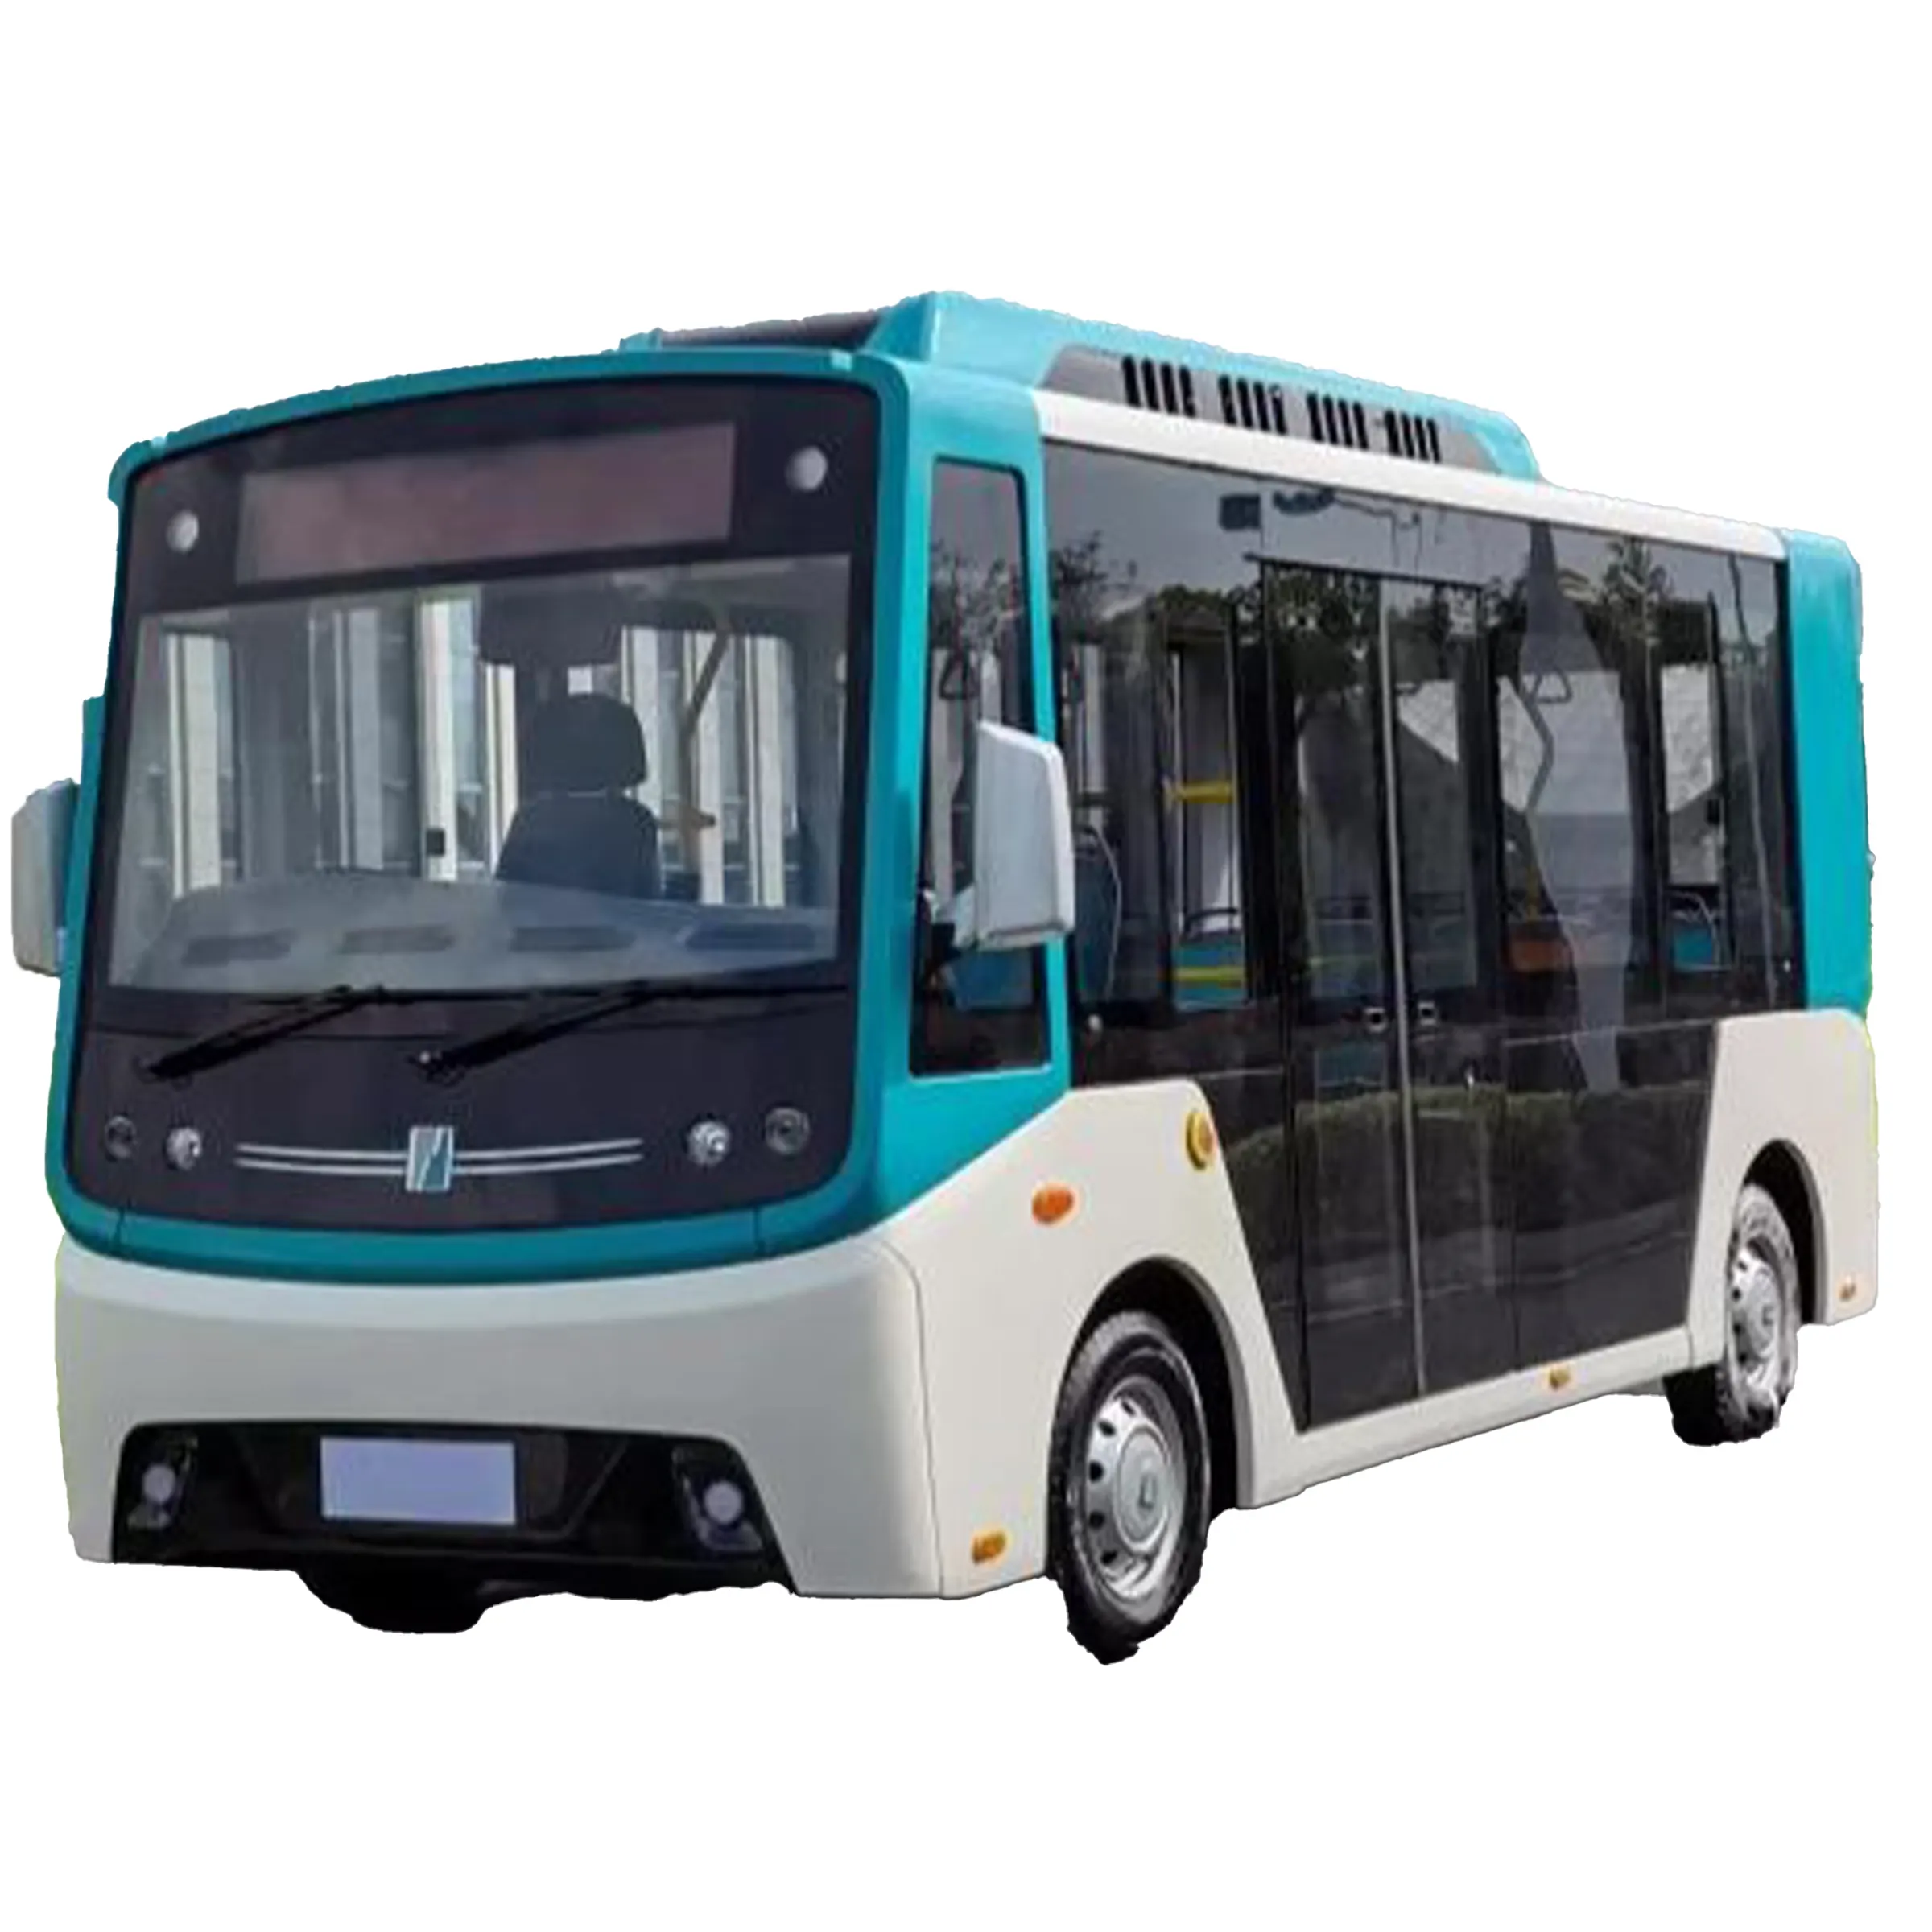 Low Price New Energy Vehicles Rhd Motorhome China Used Coach Bus Full endurance150KM Electric Bus 23 Seaters City Buses For Sale